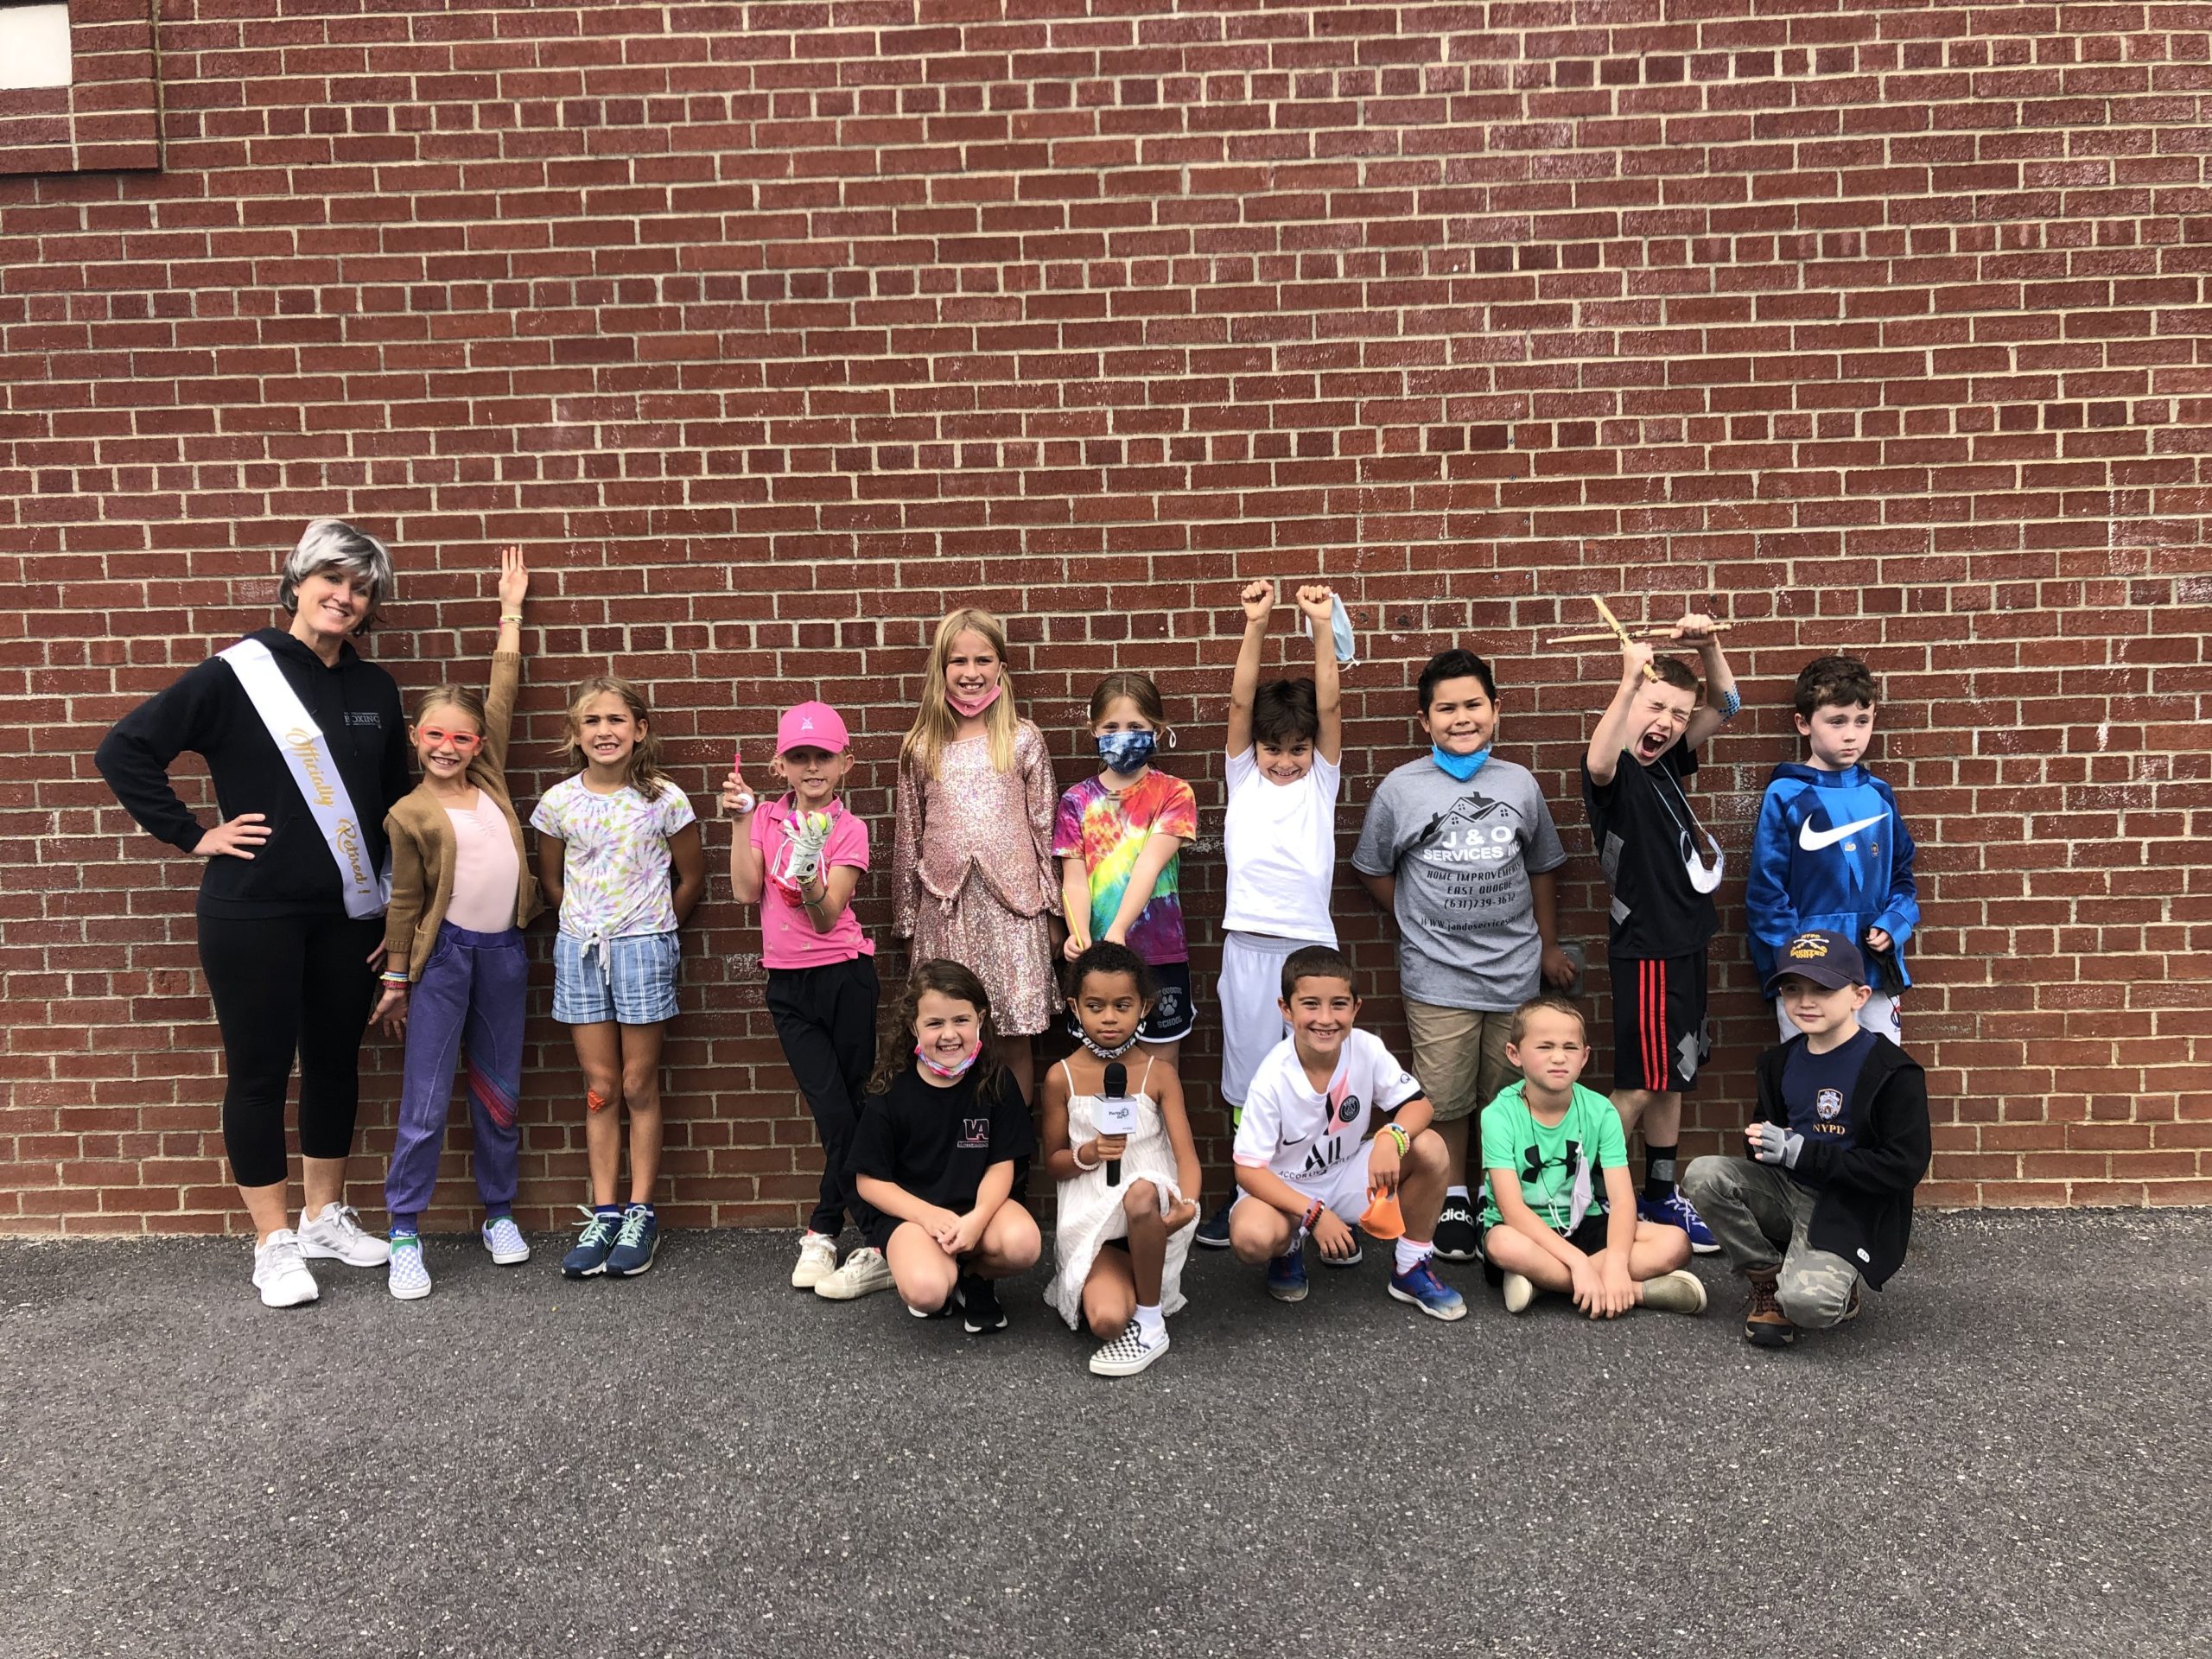 Students in Mrs. Squires’s class at East Quogue School participated Wacky Wednesday last week, in which they took part in fun yet educational activities.